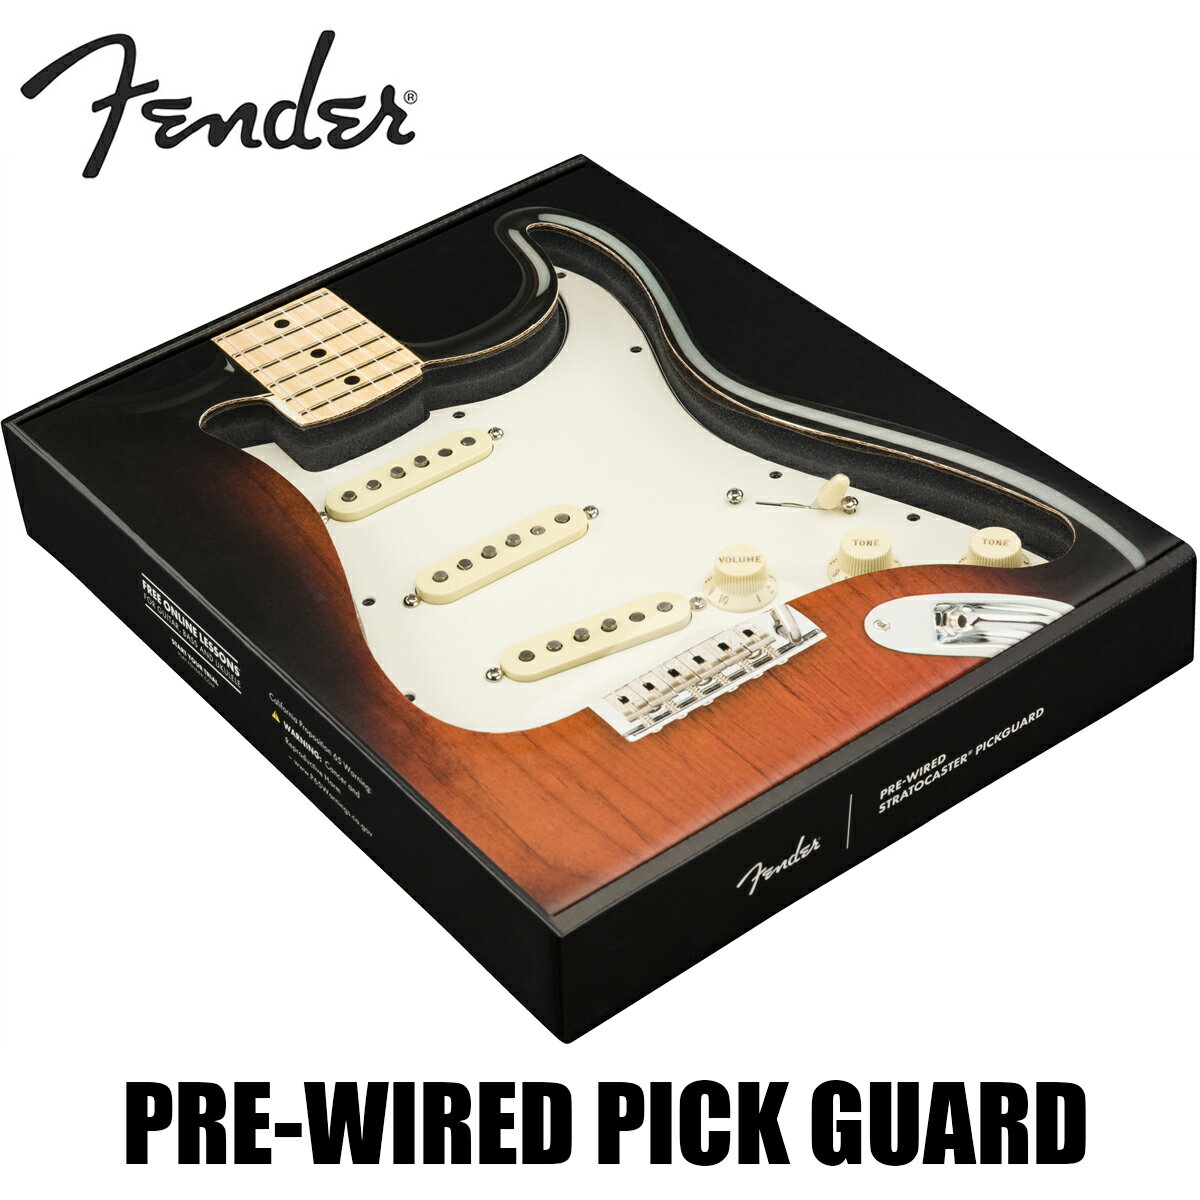 Fender Pre-Wired Strat Pickguard Custom Shop Fat 50's SSS -Parchment / 11 Hole PG- 新品[フェンダー][ピックガード][ギターパーツ,リプレイスメントパーツ]